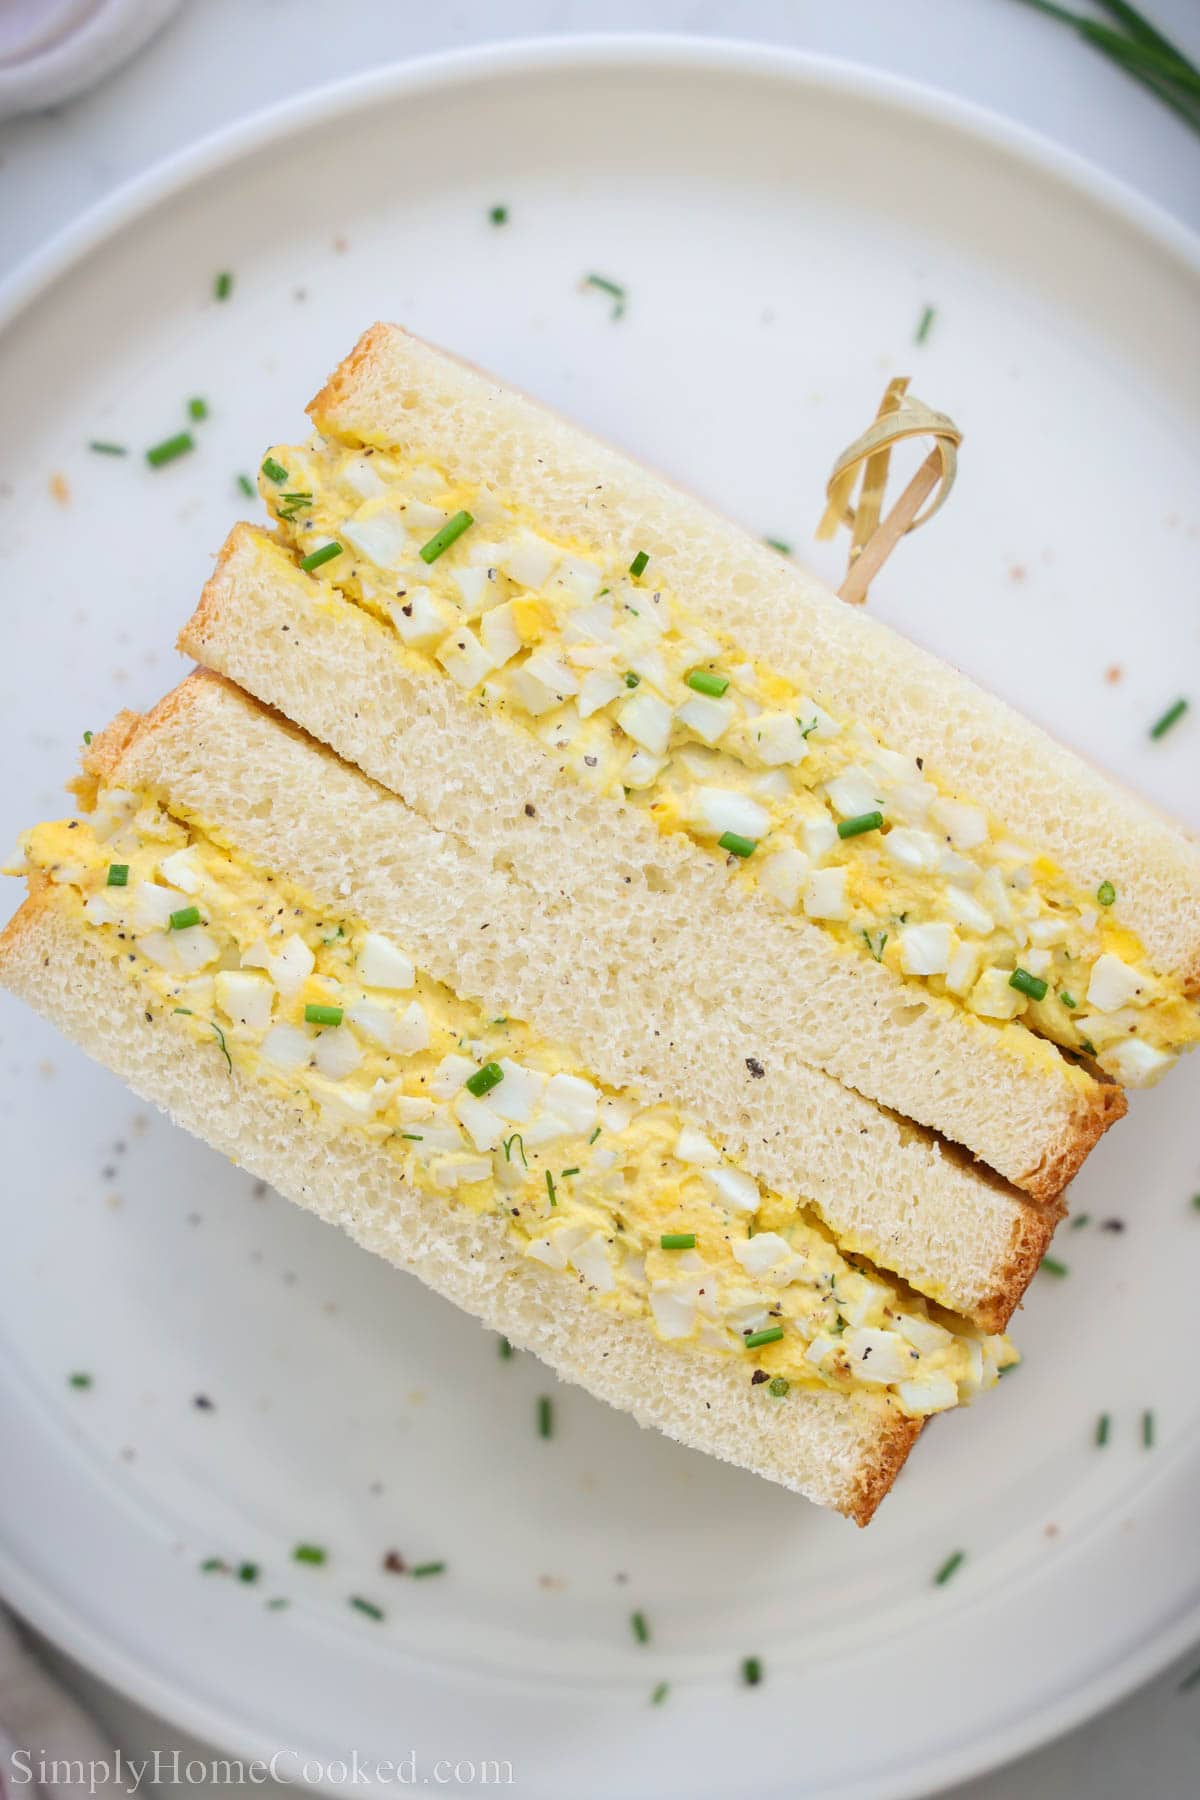 Egg Sandwich cut in half and stacked, held together with a toothpick.